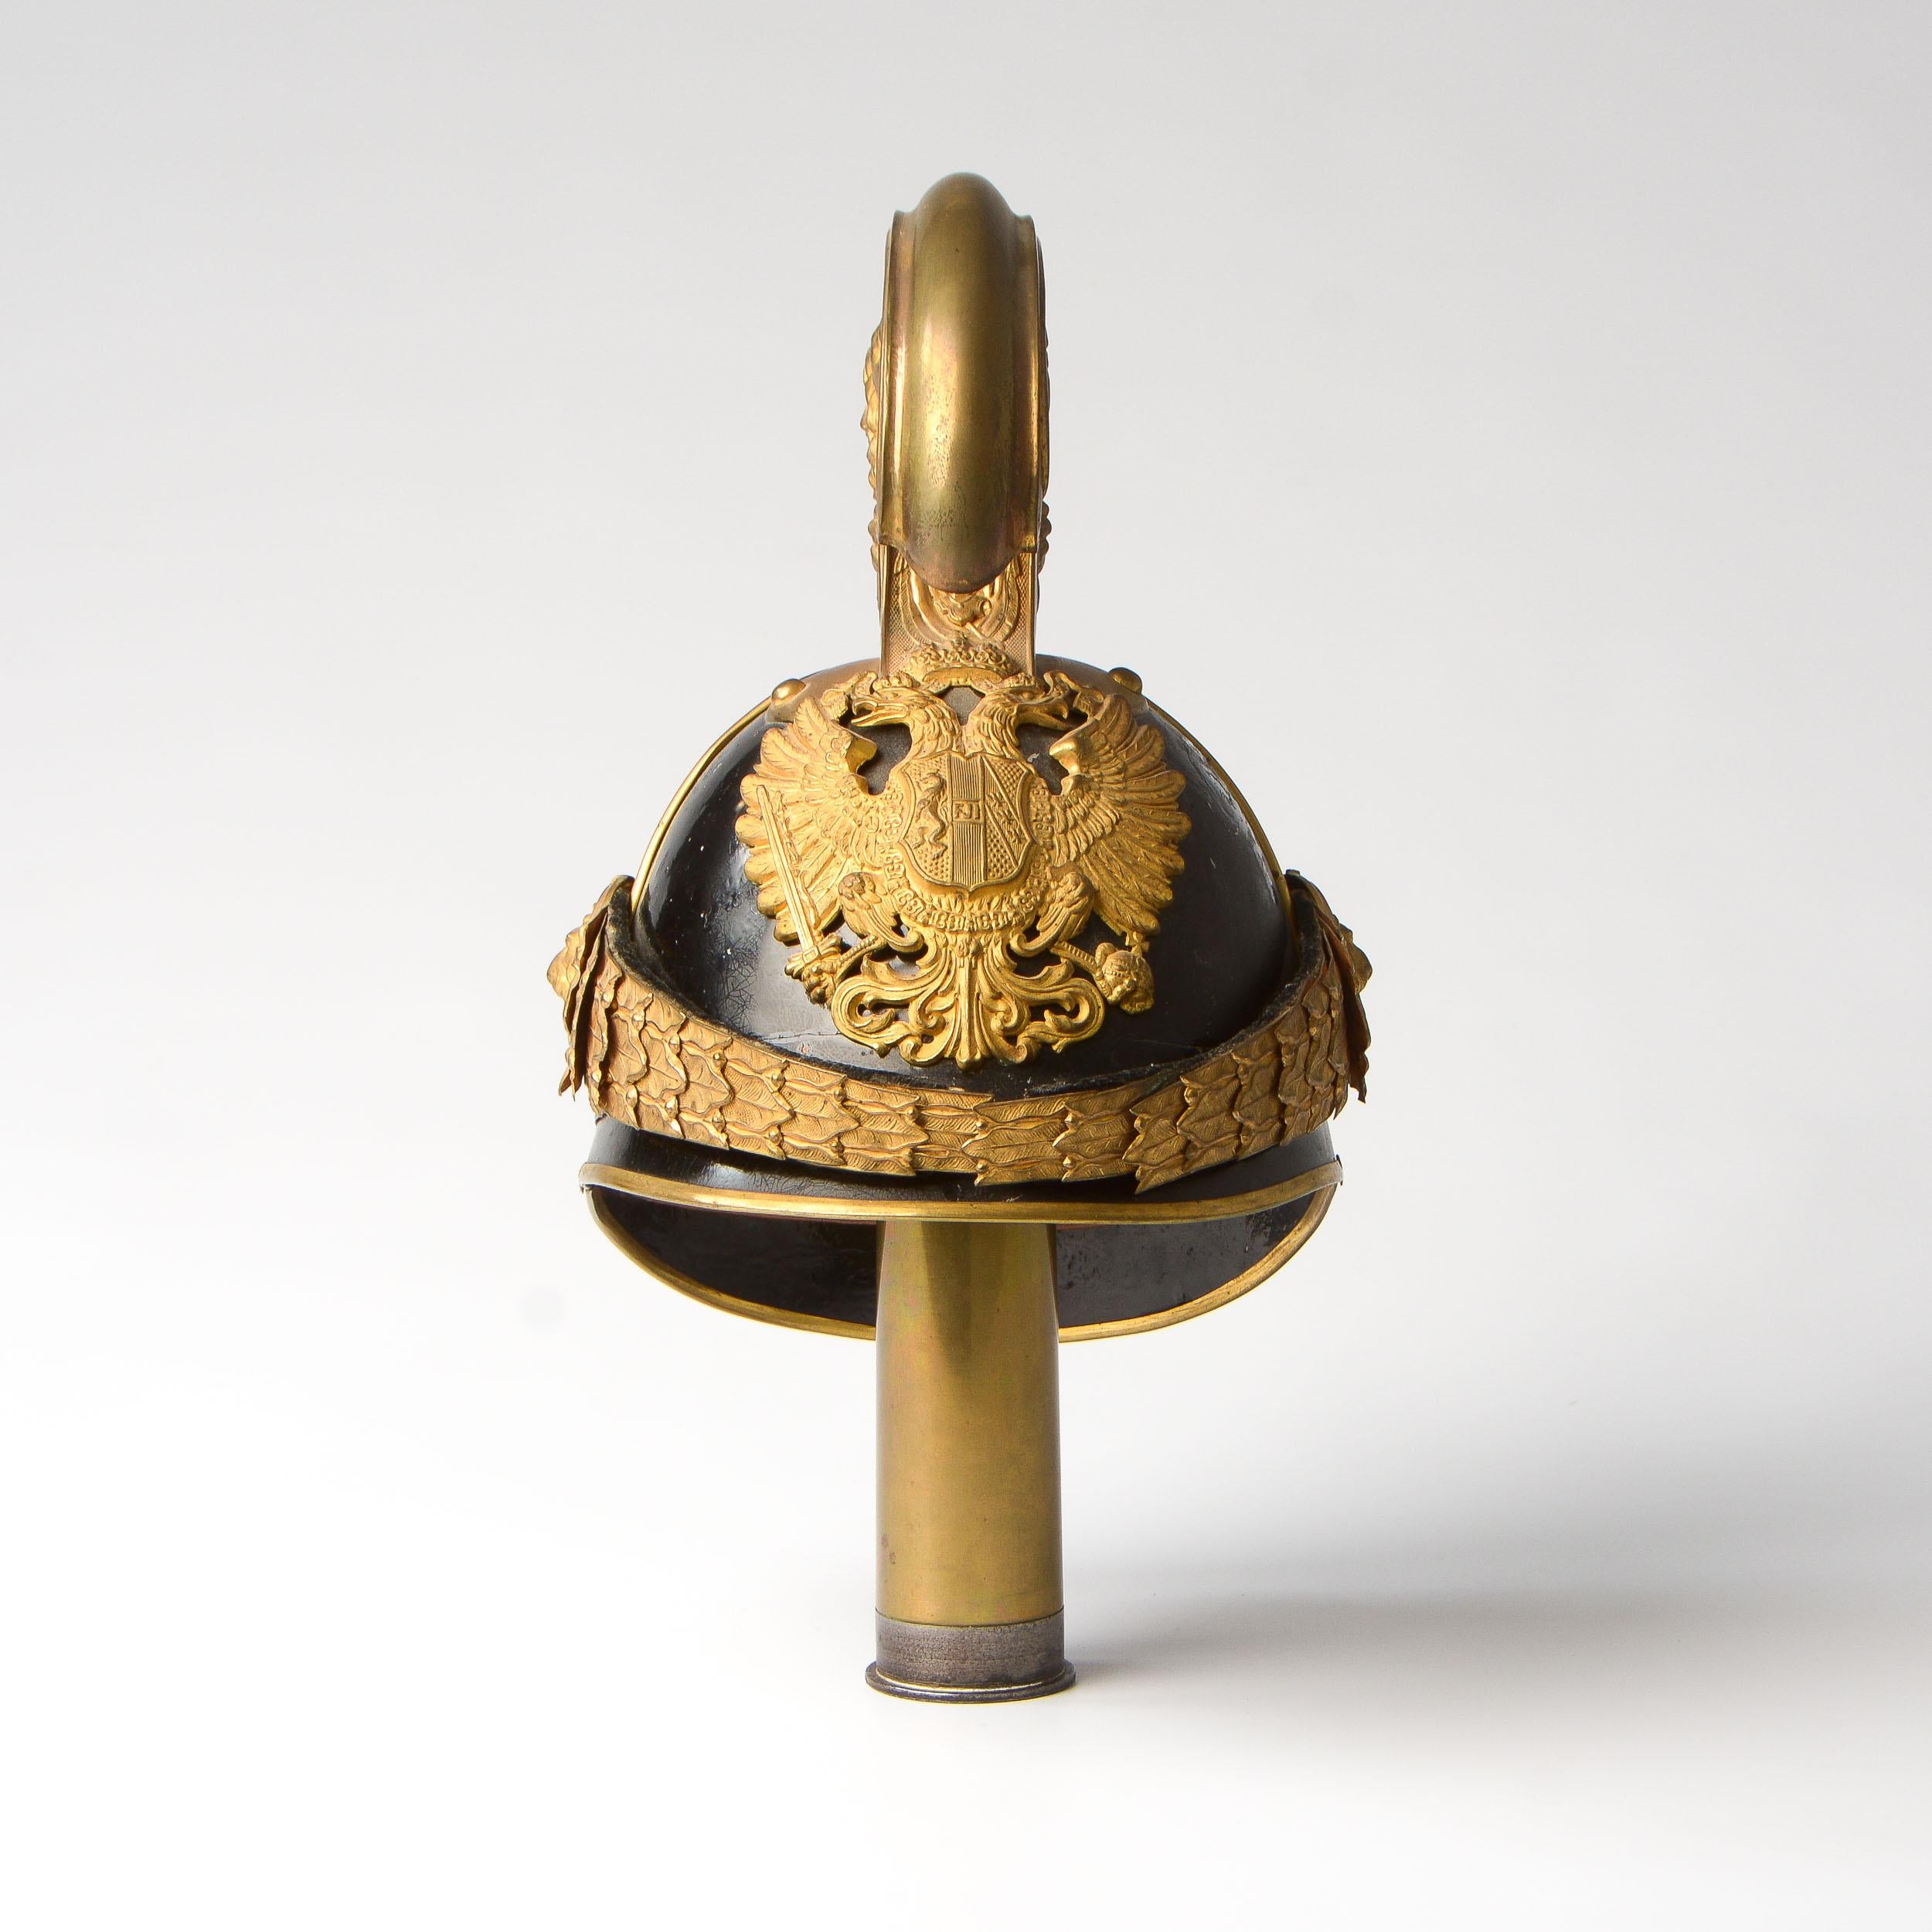 An original Austrian model 1905 Dragoon Officers’ helmet. Black enameled metal body with brass trim and high stamped-brass comb with a vignette of a lion in combat with a snake embossed on each side. Brass Austrian double-headed eagle front plate